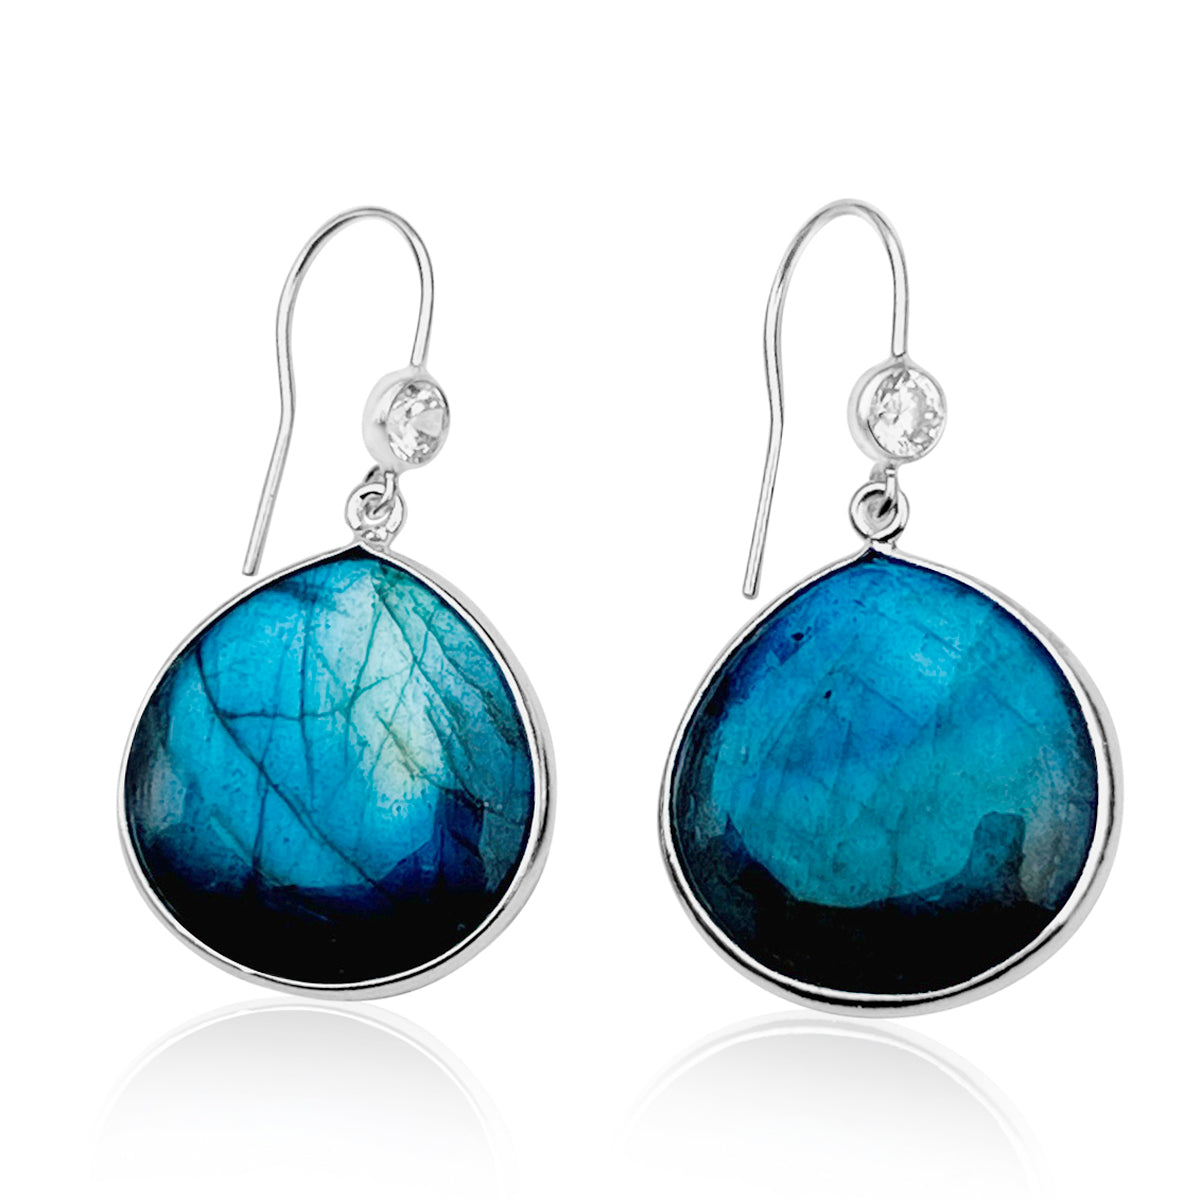 The Magic Mindset Labradorite Earrings are a beautiful pair of sterling silver earrings that feature stunning, teardrop-shaped labradorite stones as their centerpiece. Labradorite is a unique crystal known for its iridescent hues and ability to enhance intuition and spiritual awareness.